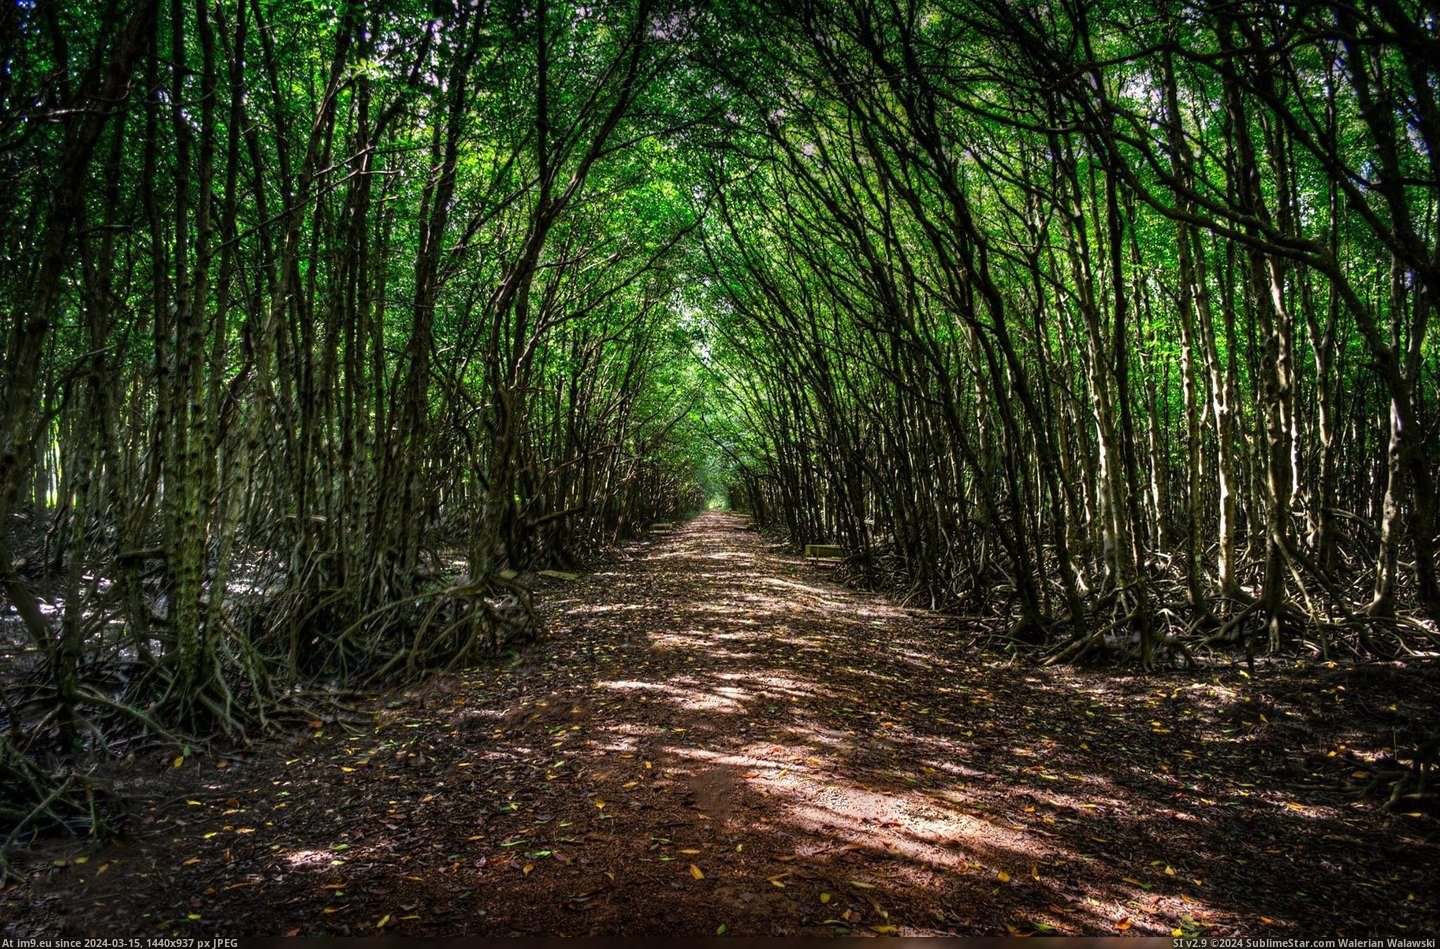 #City #South #Vietnam #Forest #Path [Earthporn] Path in Can Gio Forest, Vietnam. 1h south from HoChiMinh City by motorbike [2048x1344] Pic. (Bild von album My r/EARTHPORN favs))